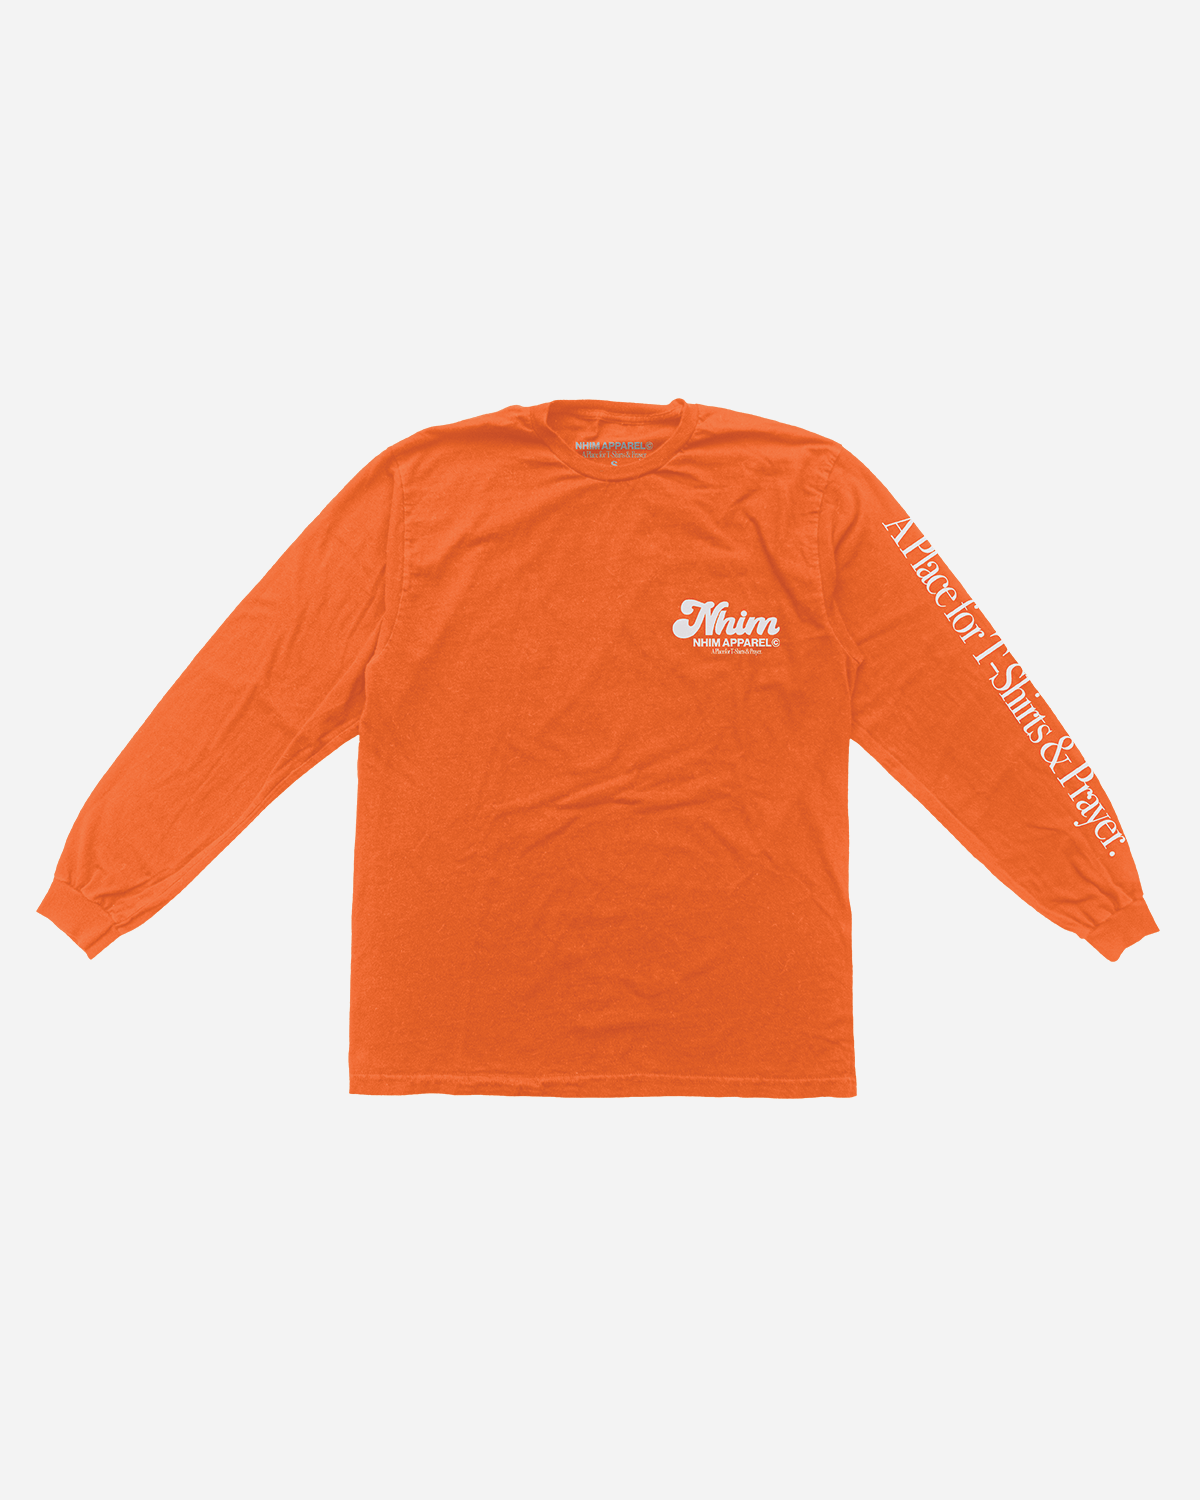 God is Good! God is good all the time Christian long-sleeve orange shirt. puff print. Nhim Apparel Christian clothing company, a place for t-shirts and prayer.